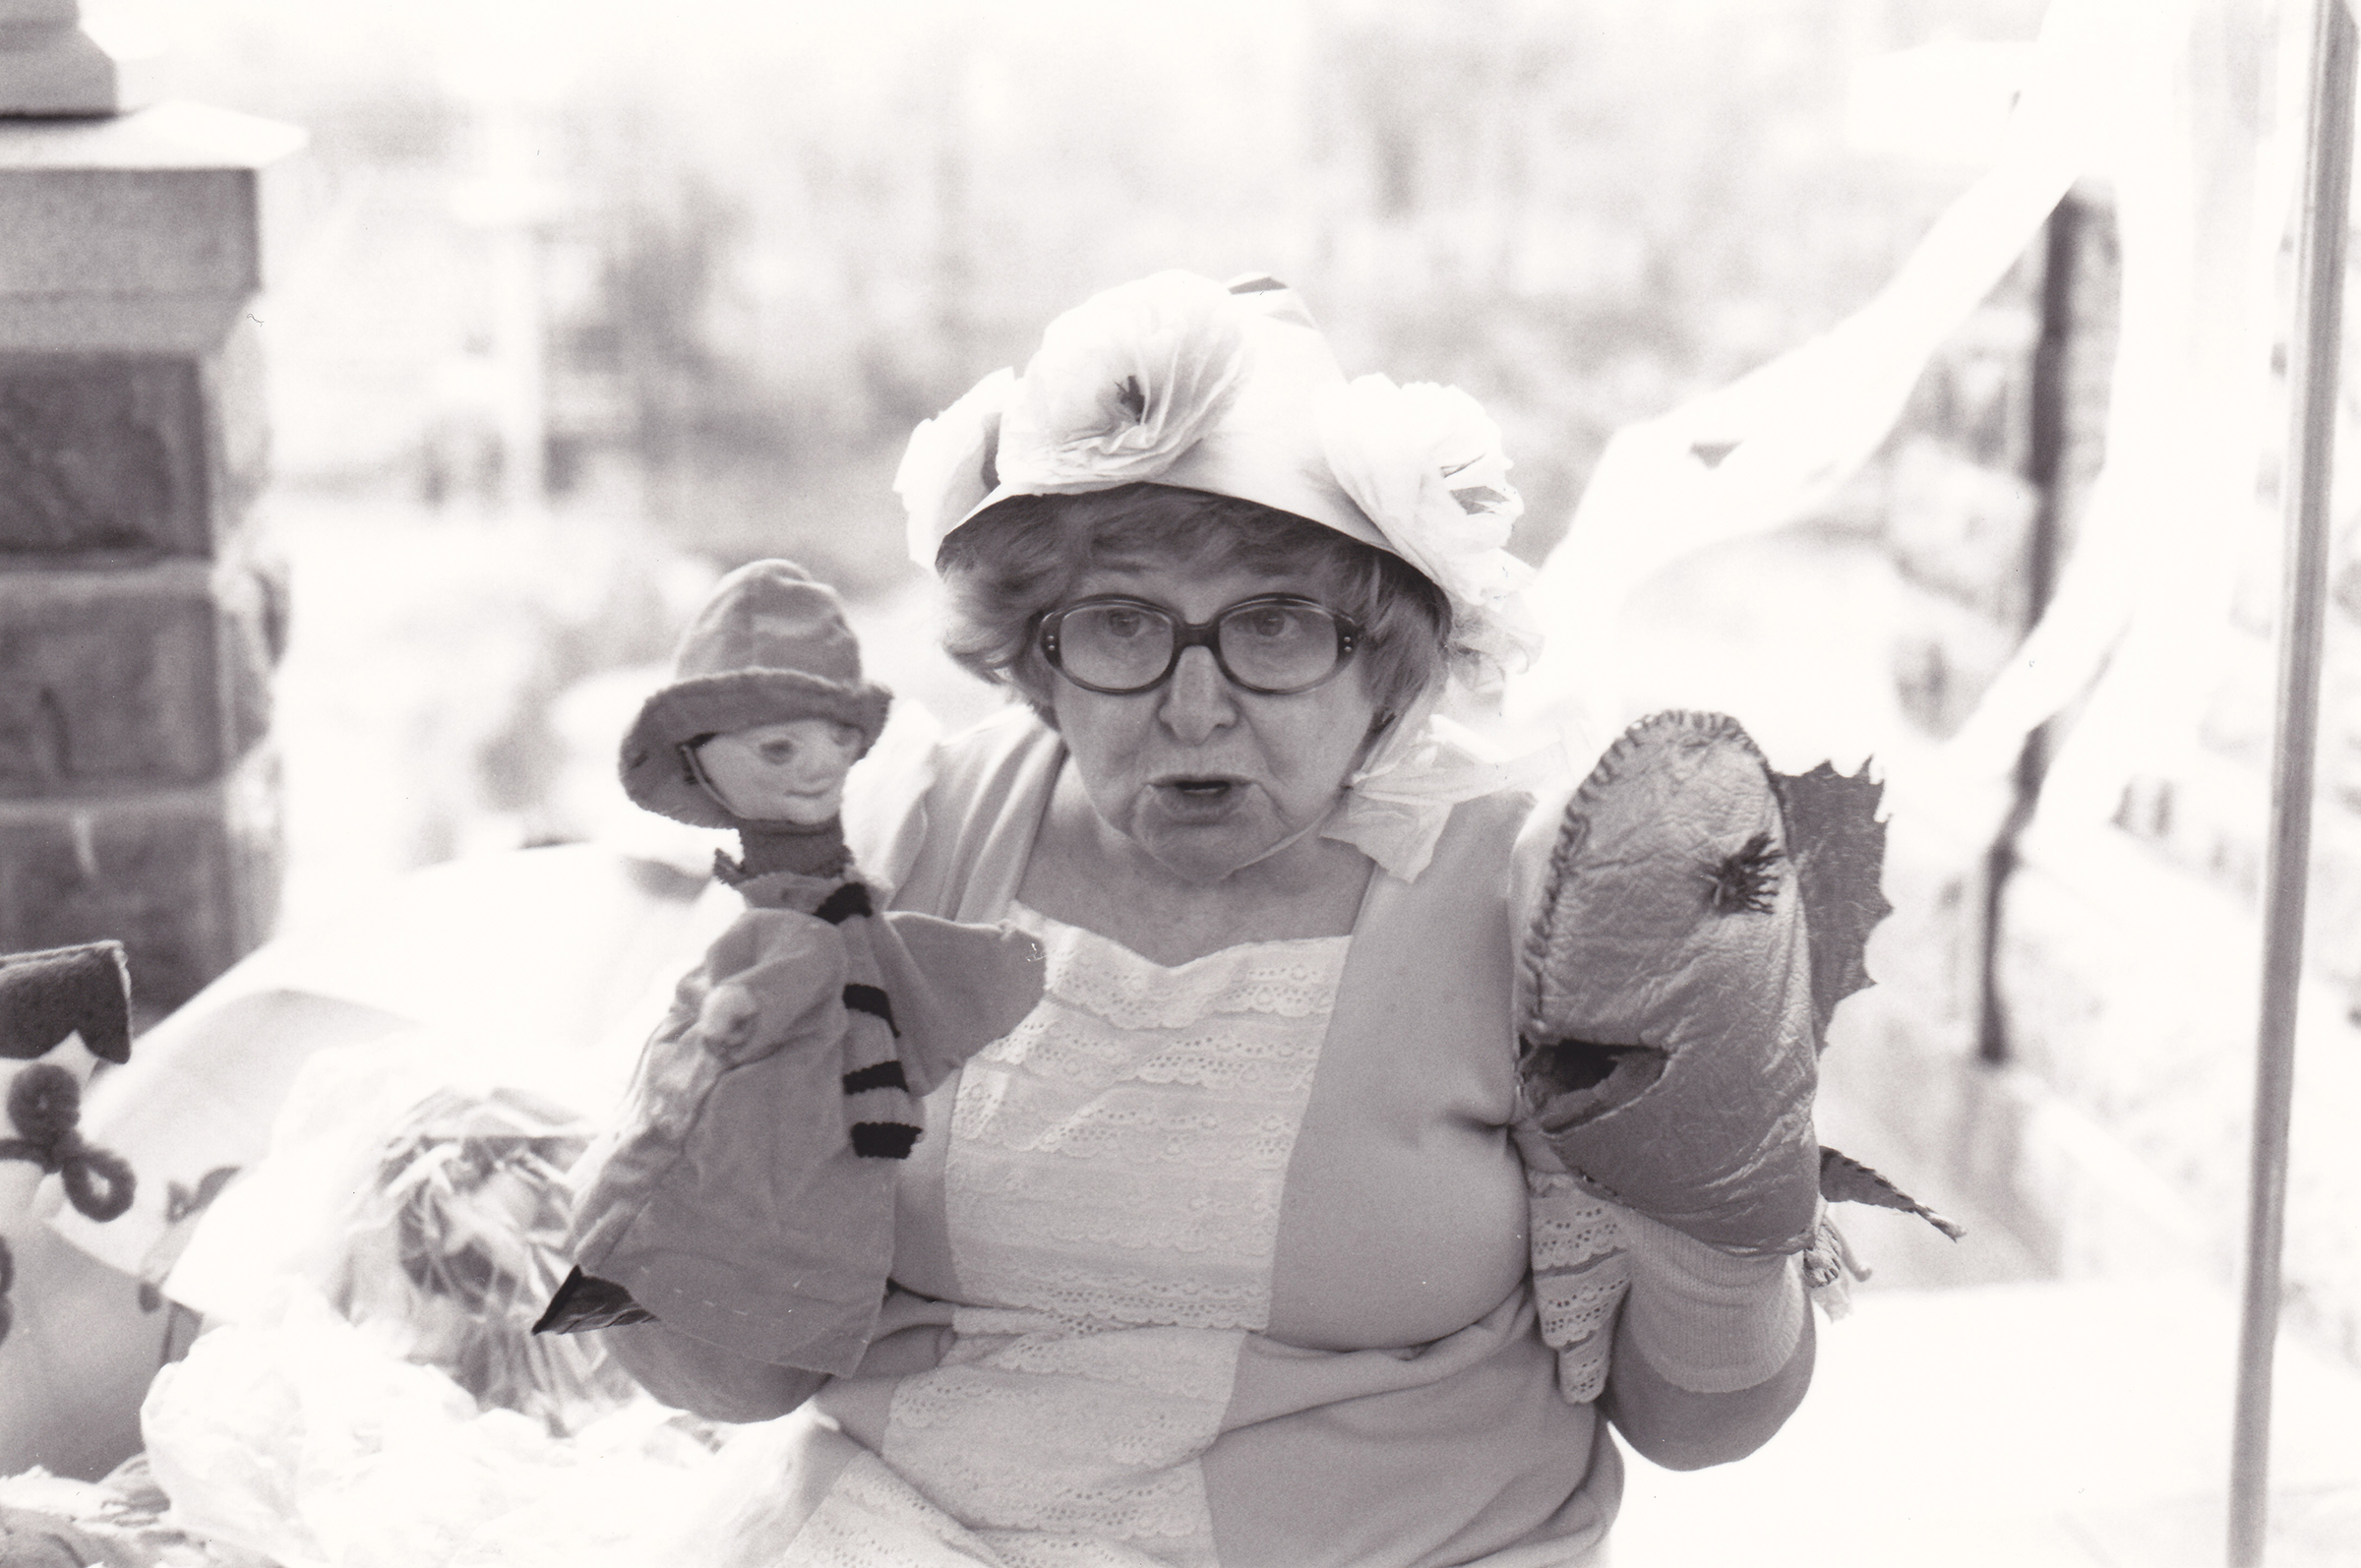 Bernice Silver with her puppets in Central Park in April, 1988 (Daniel E. Ungar)